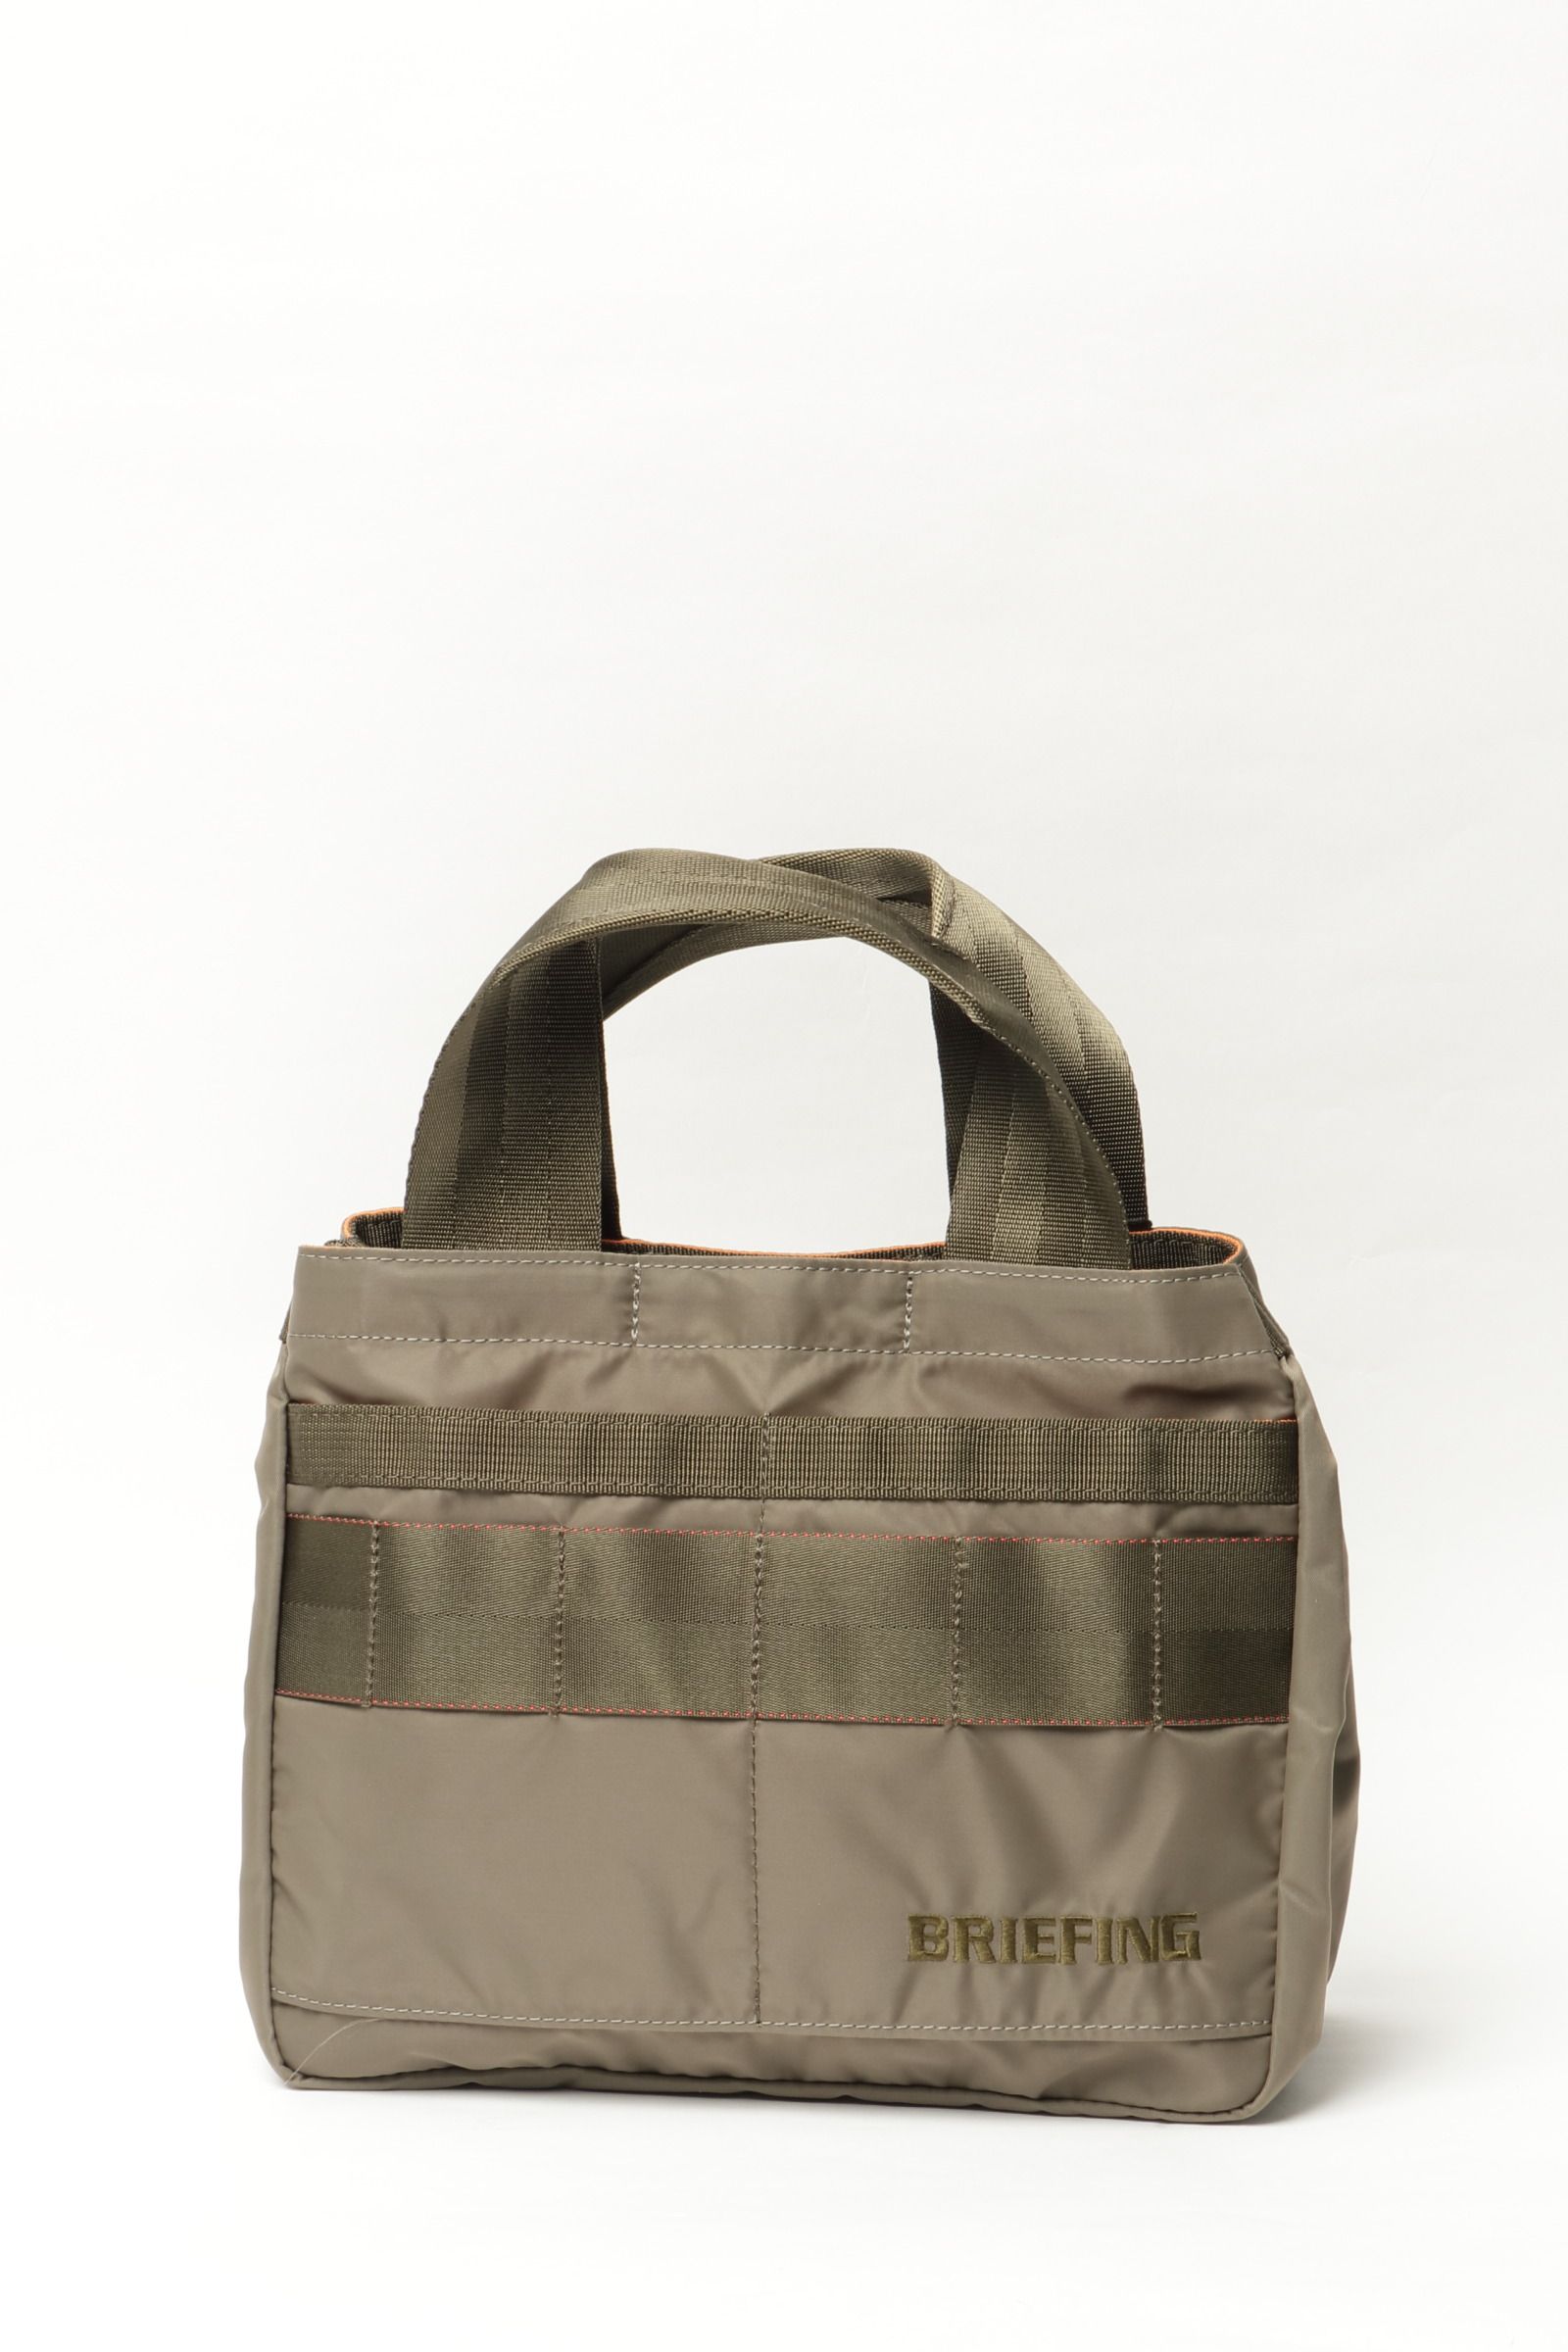 BRIEFING GOLF   CLASSIC CART TOTE RANGER GREEN ナイロンツイル